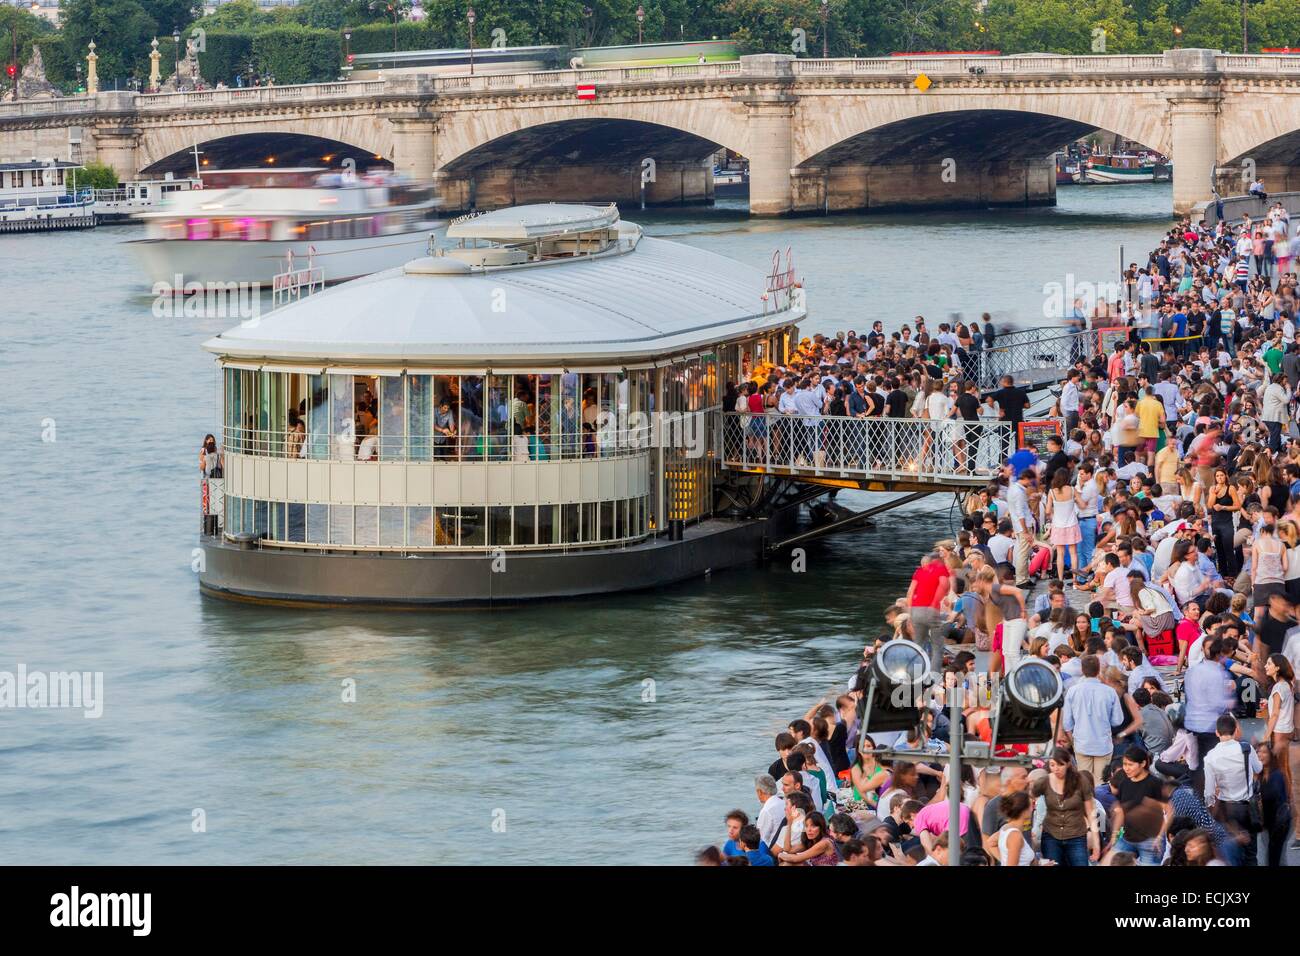 Le Barboteur, a nomadic and free cultural barge in Paris